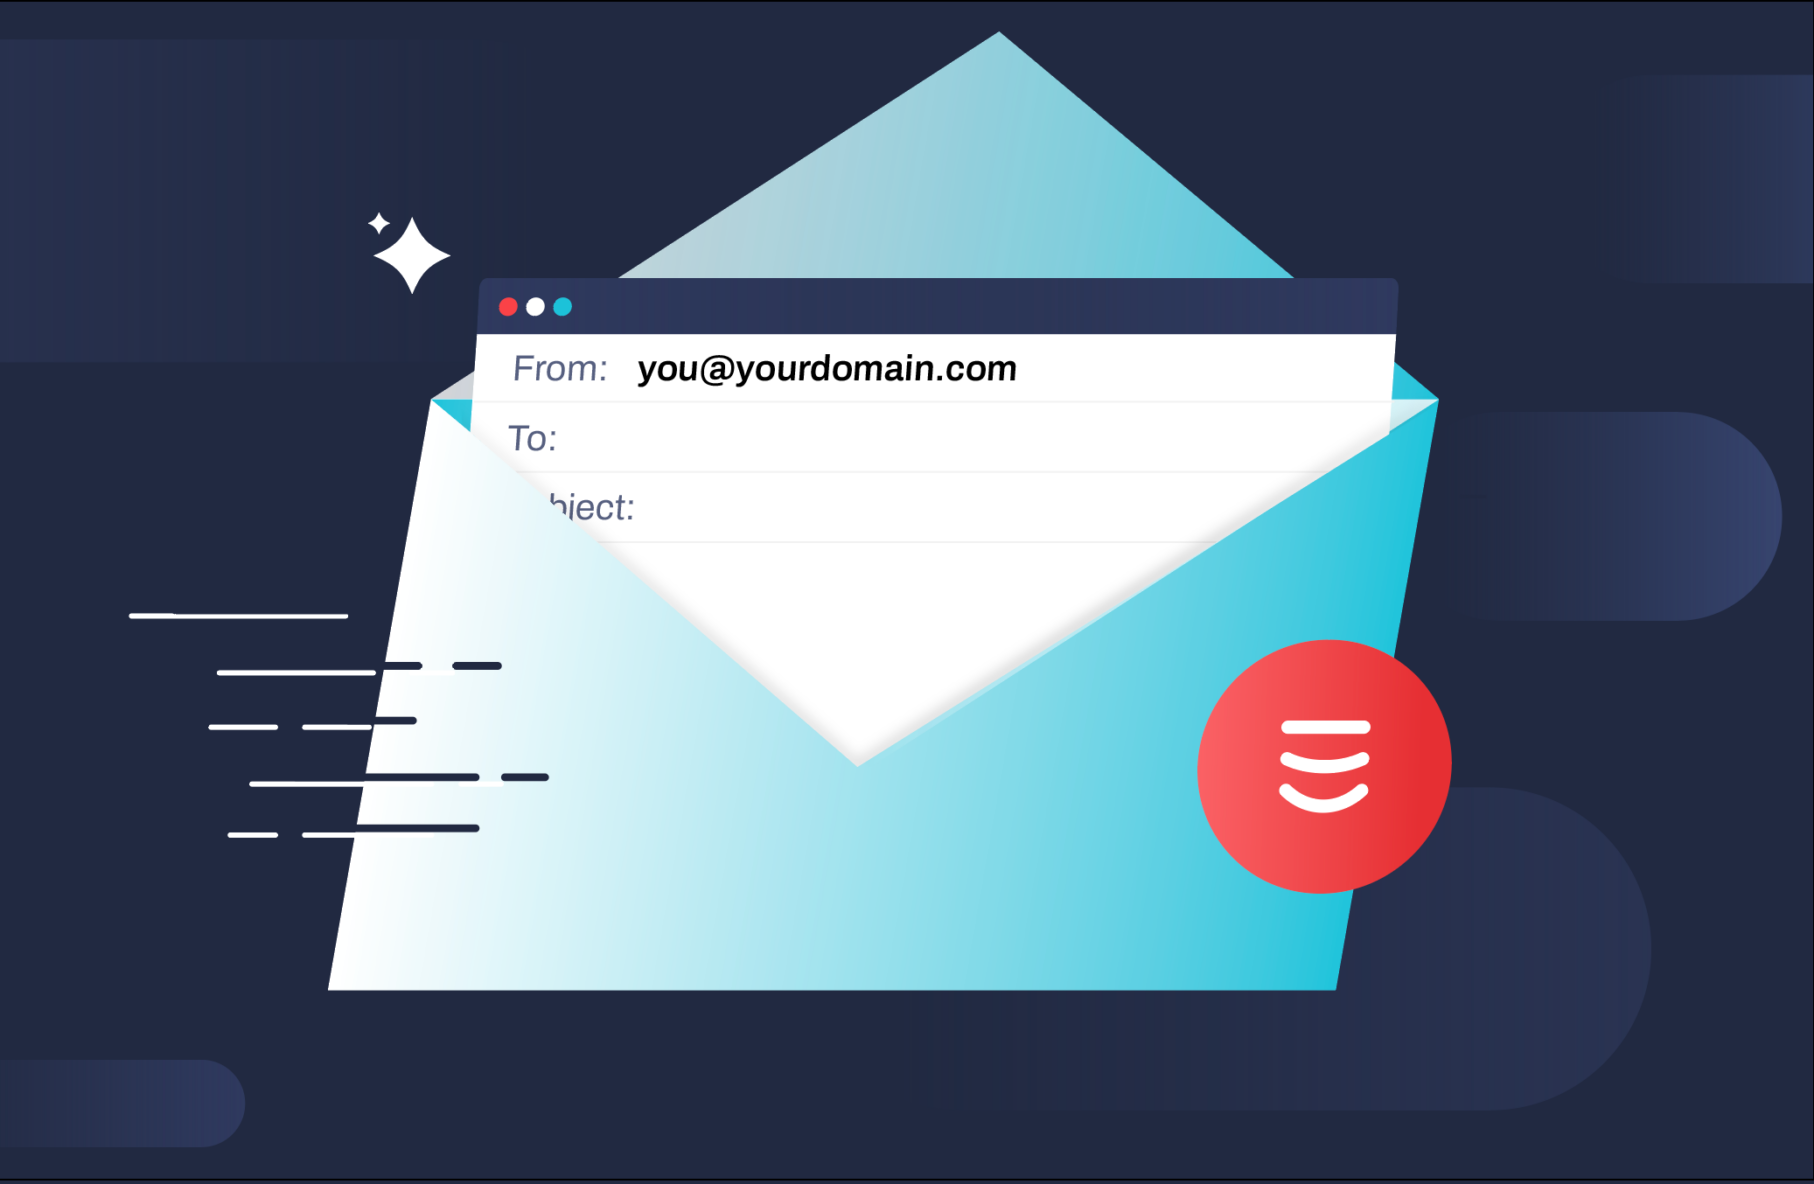 New Feature! Utilize SMTP to send email from your domain!